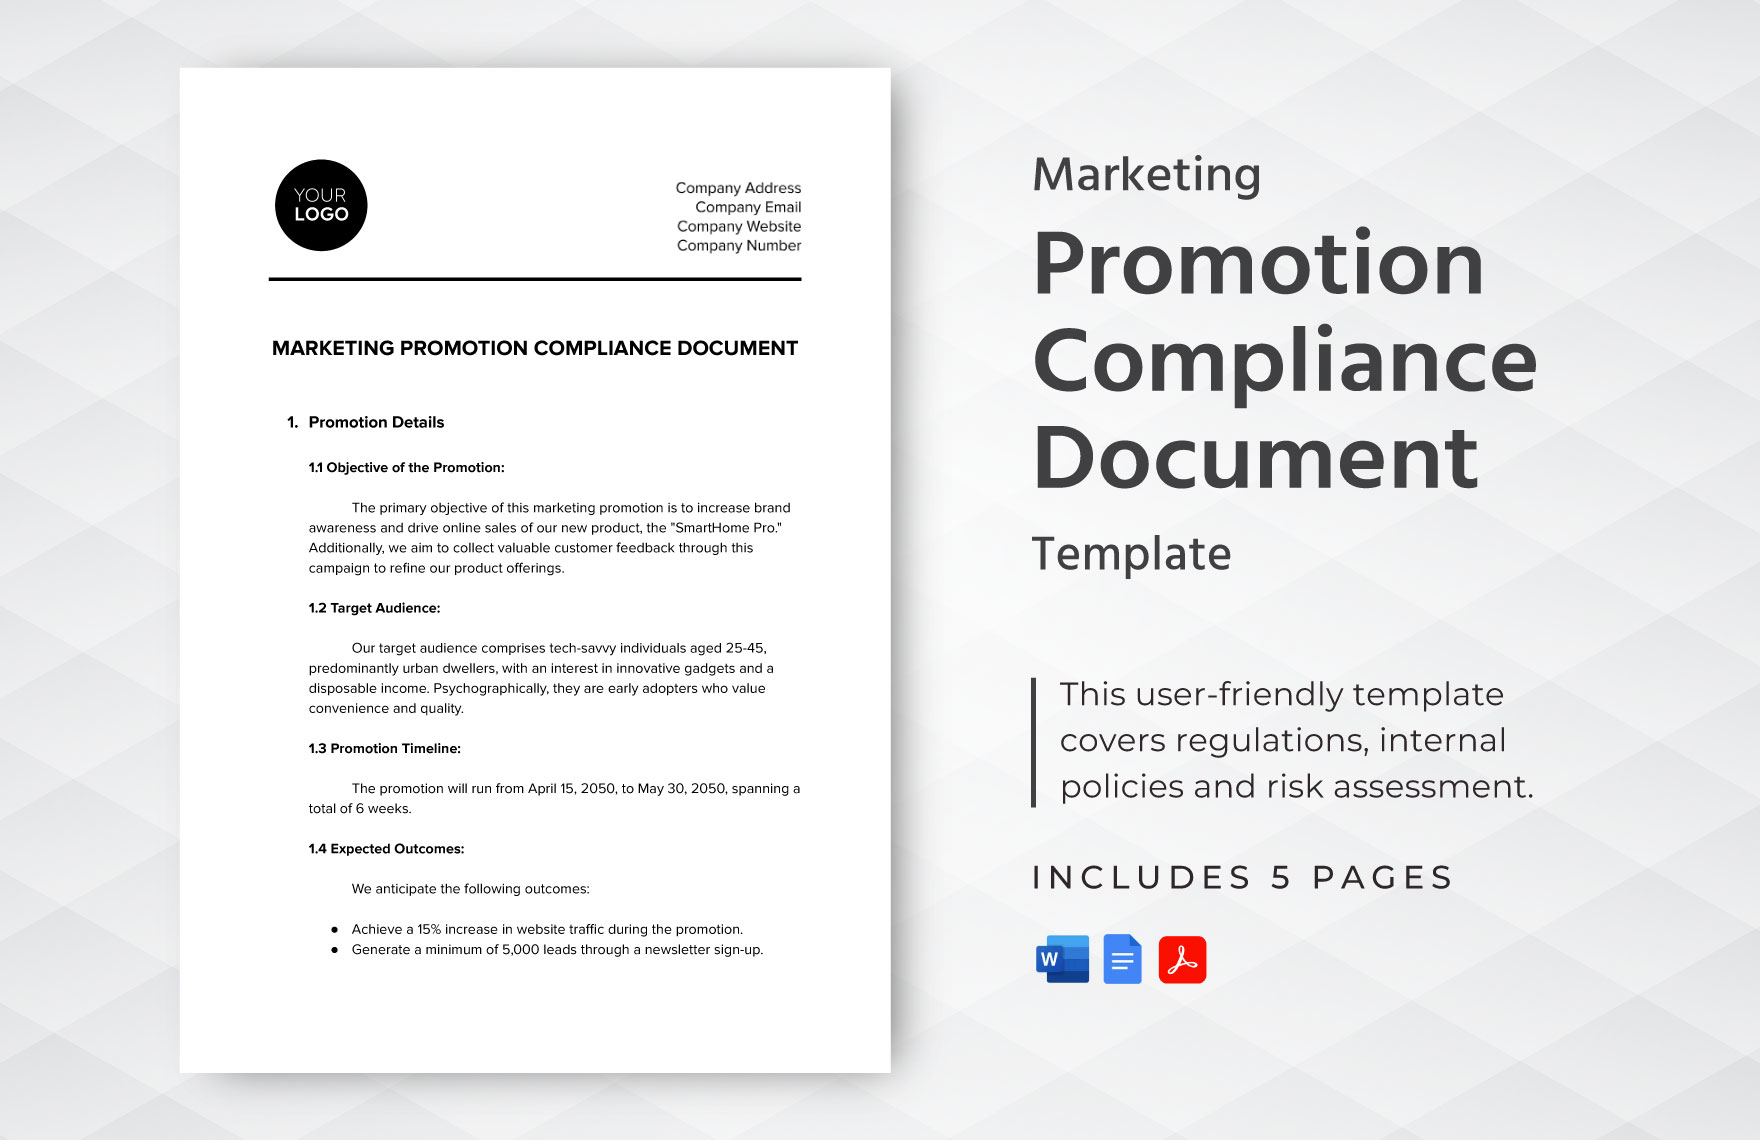 Marketing Promotion Compliance Document Template in Word, Google Docs, PDF